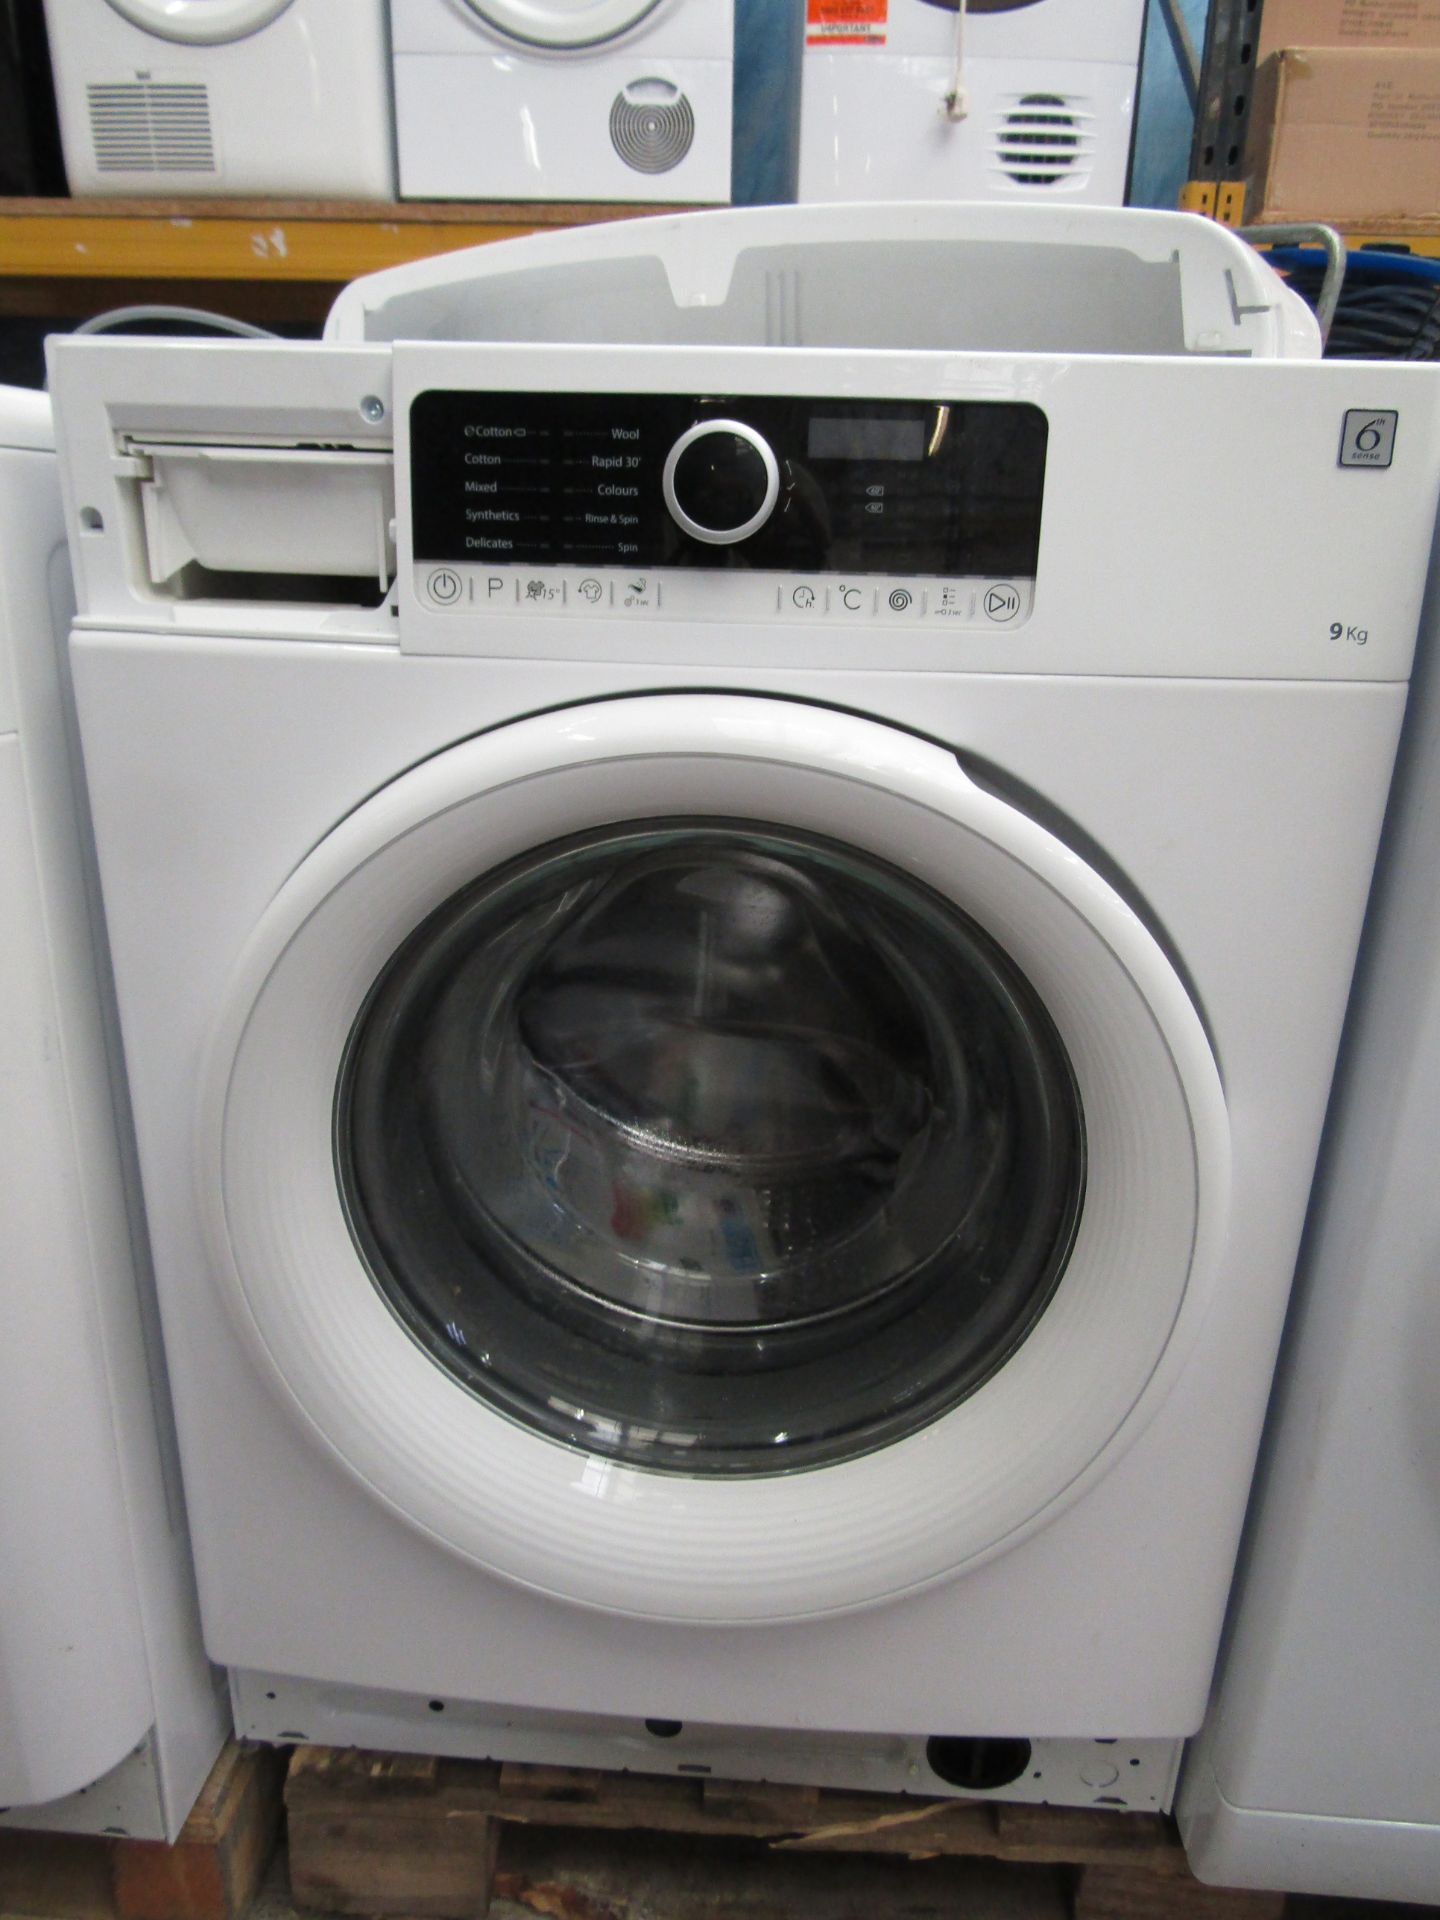 Whirlpool 9Kg  6th Sense Washing machine Powers up and Spins. Soap drawer front missing